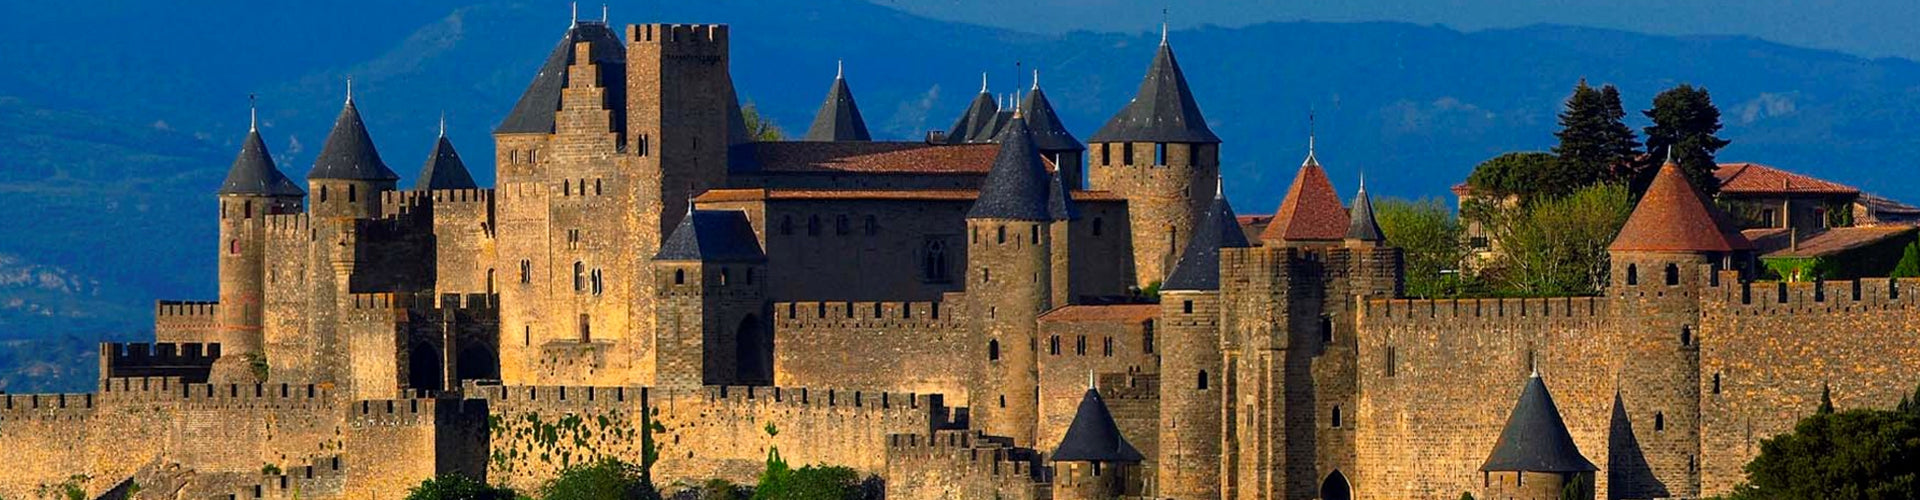 Town of Carcassonne in the Languedoc